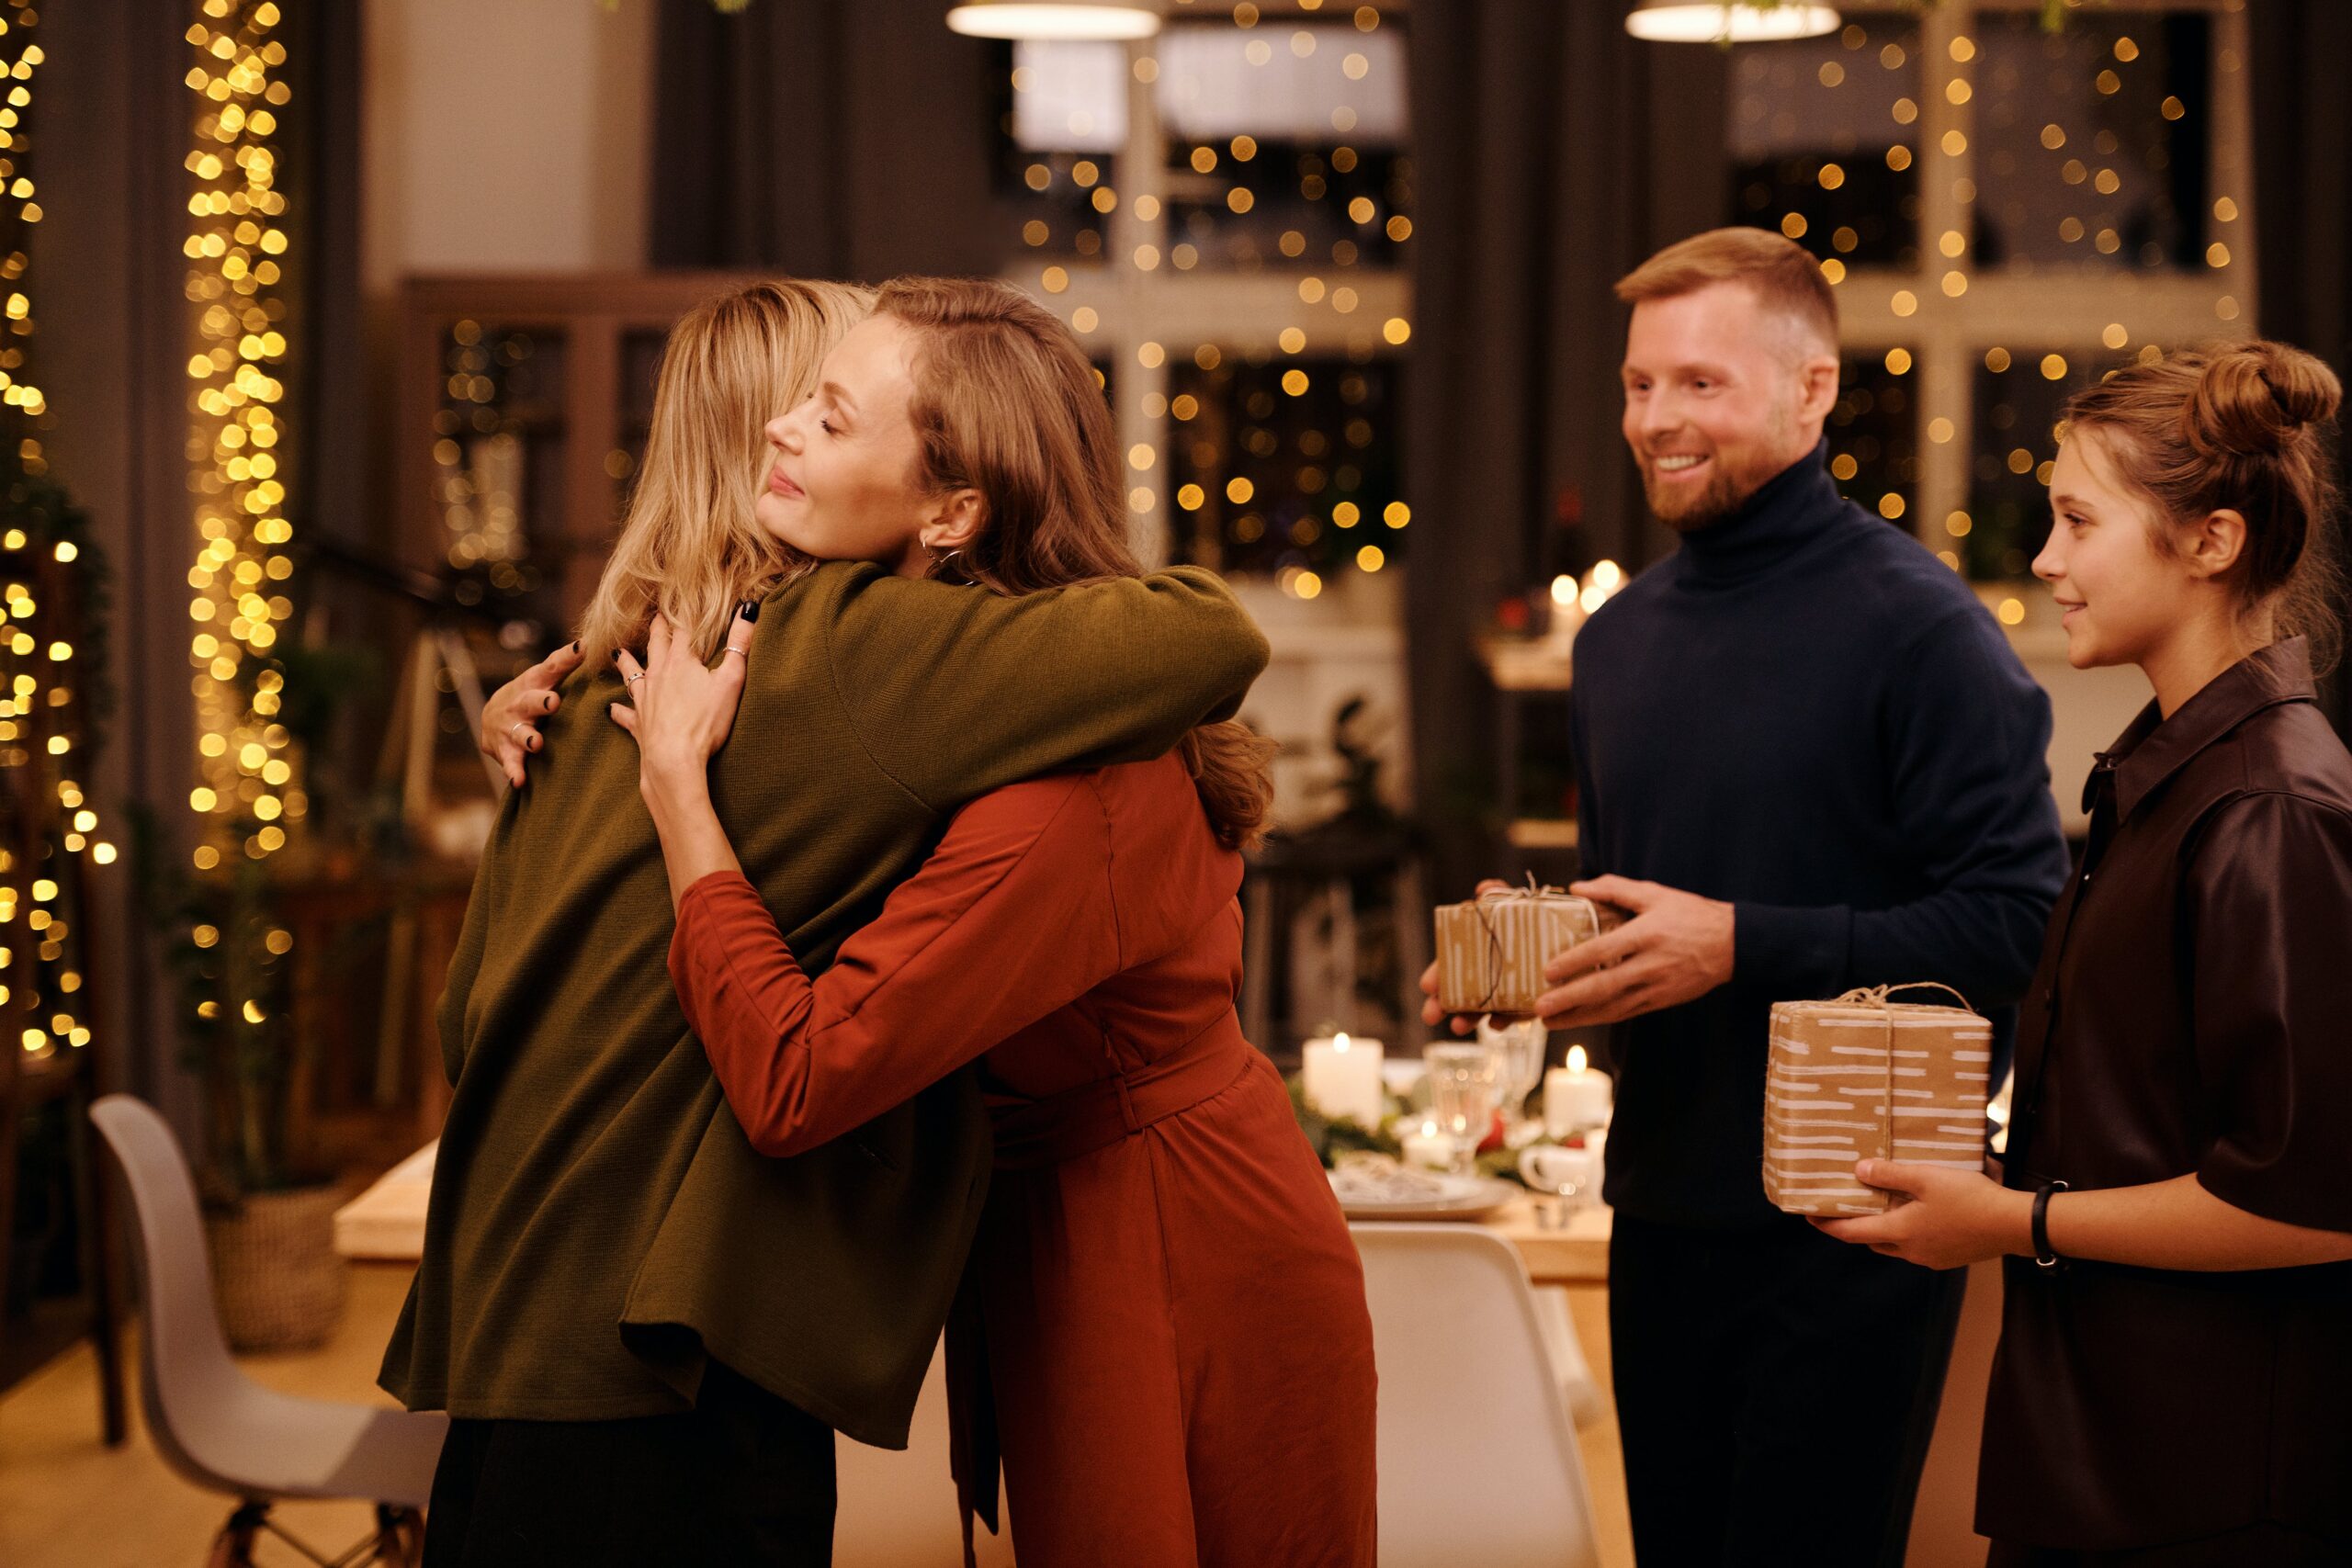 Family members embracing one another, depicting the issue of maintaining a sober Christmas celebration